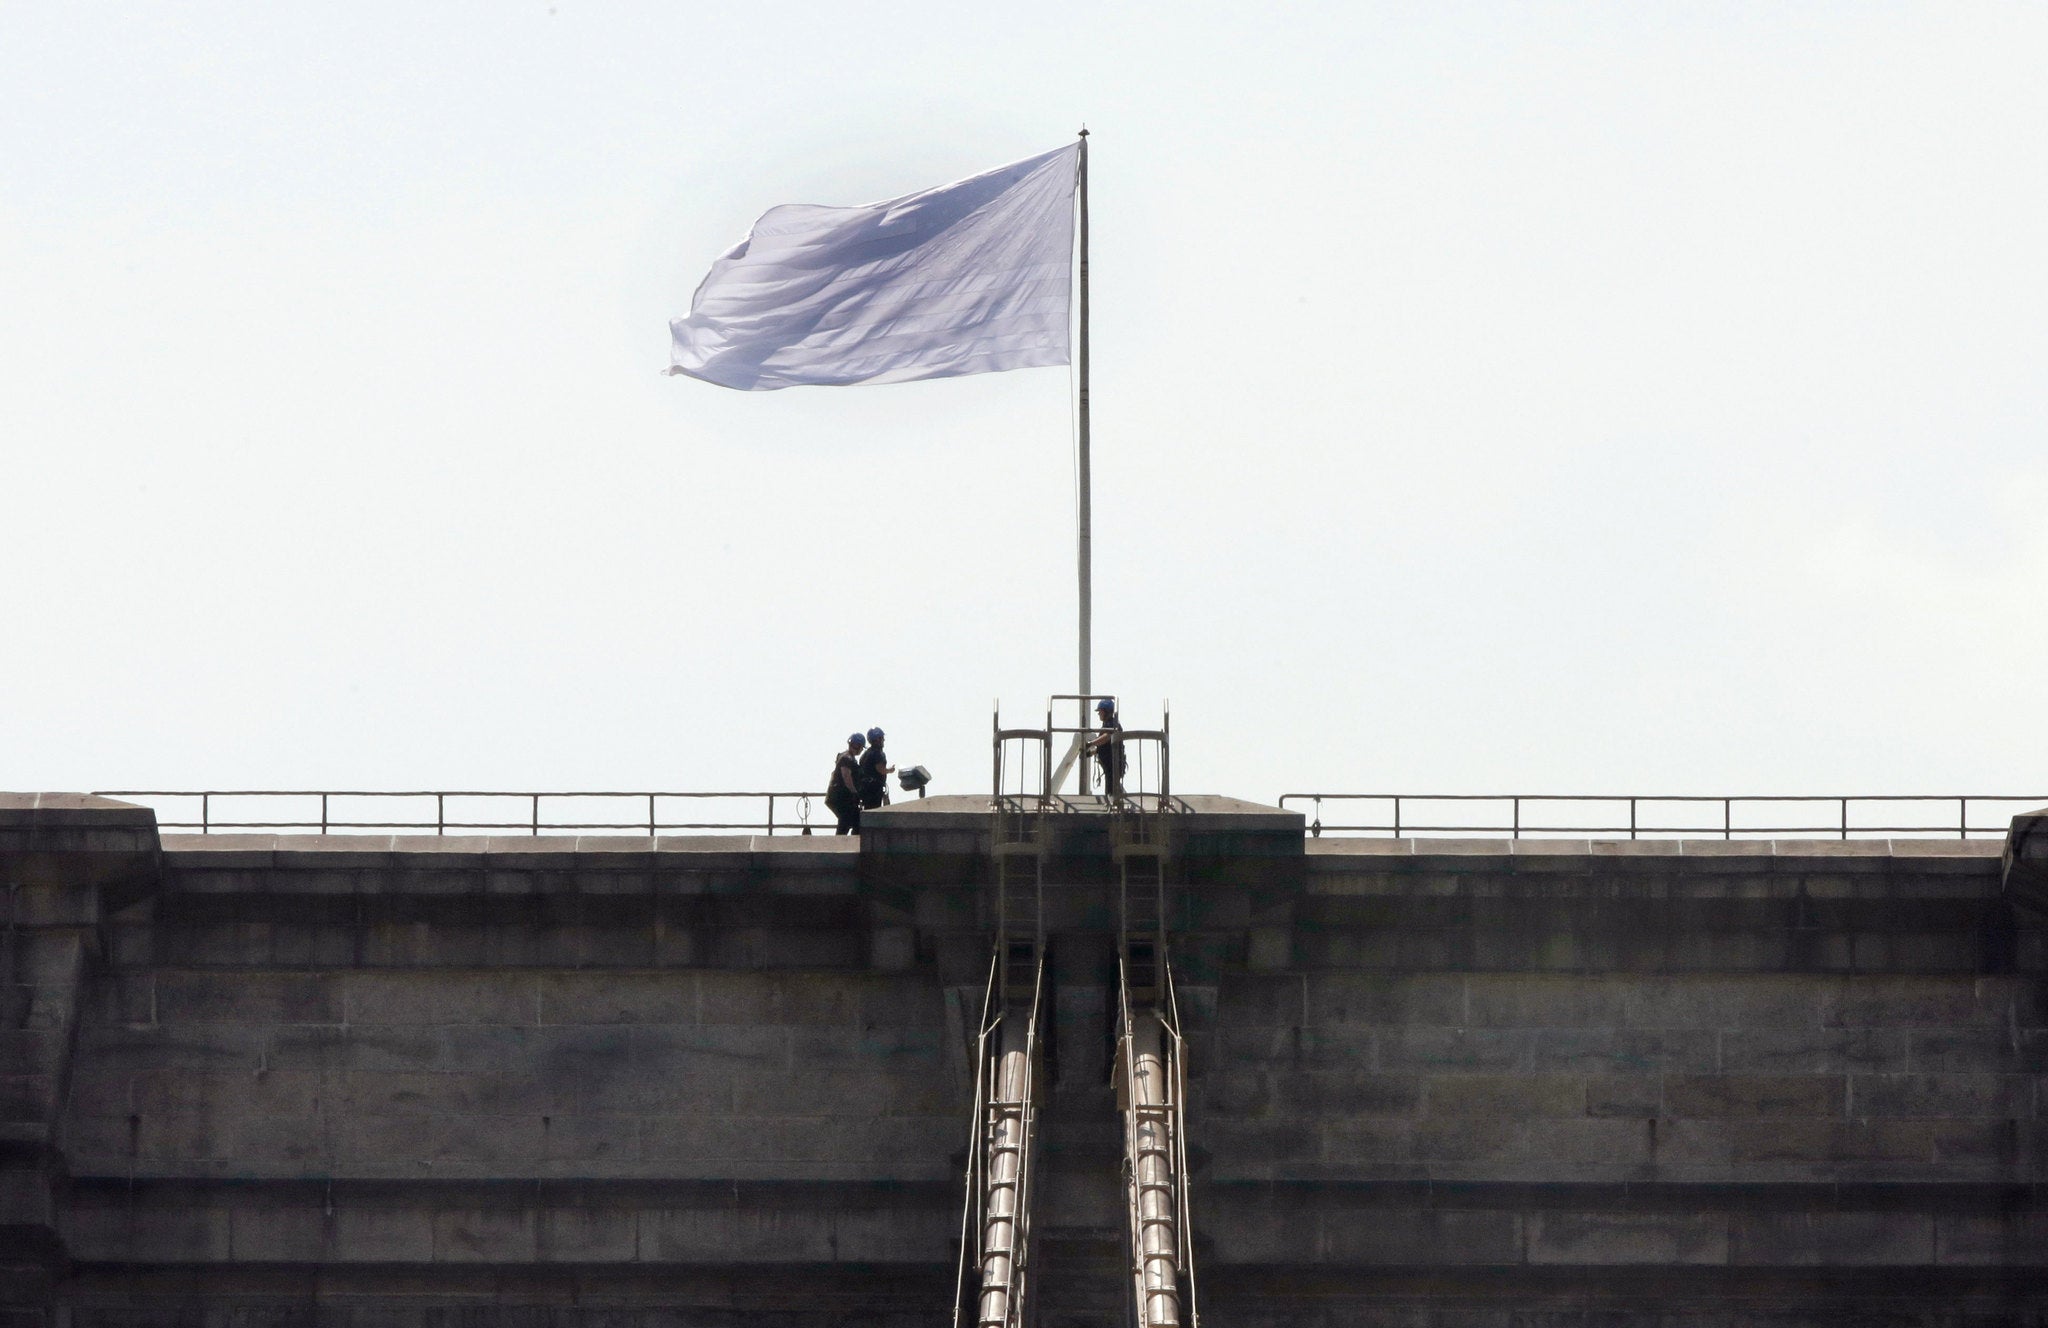 New York City Police officers stand at the base of a white flag flying atop the west tower of New York's Brooklyn Bridge, Tuesday, July 22, 2014. Someone replaced two American flags on the bridge with mysterious white flags. The white flags, international